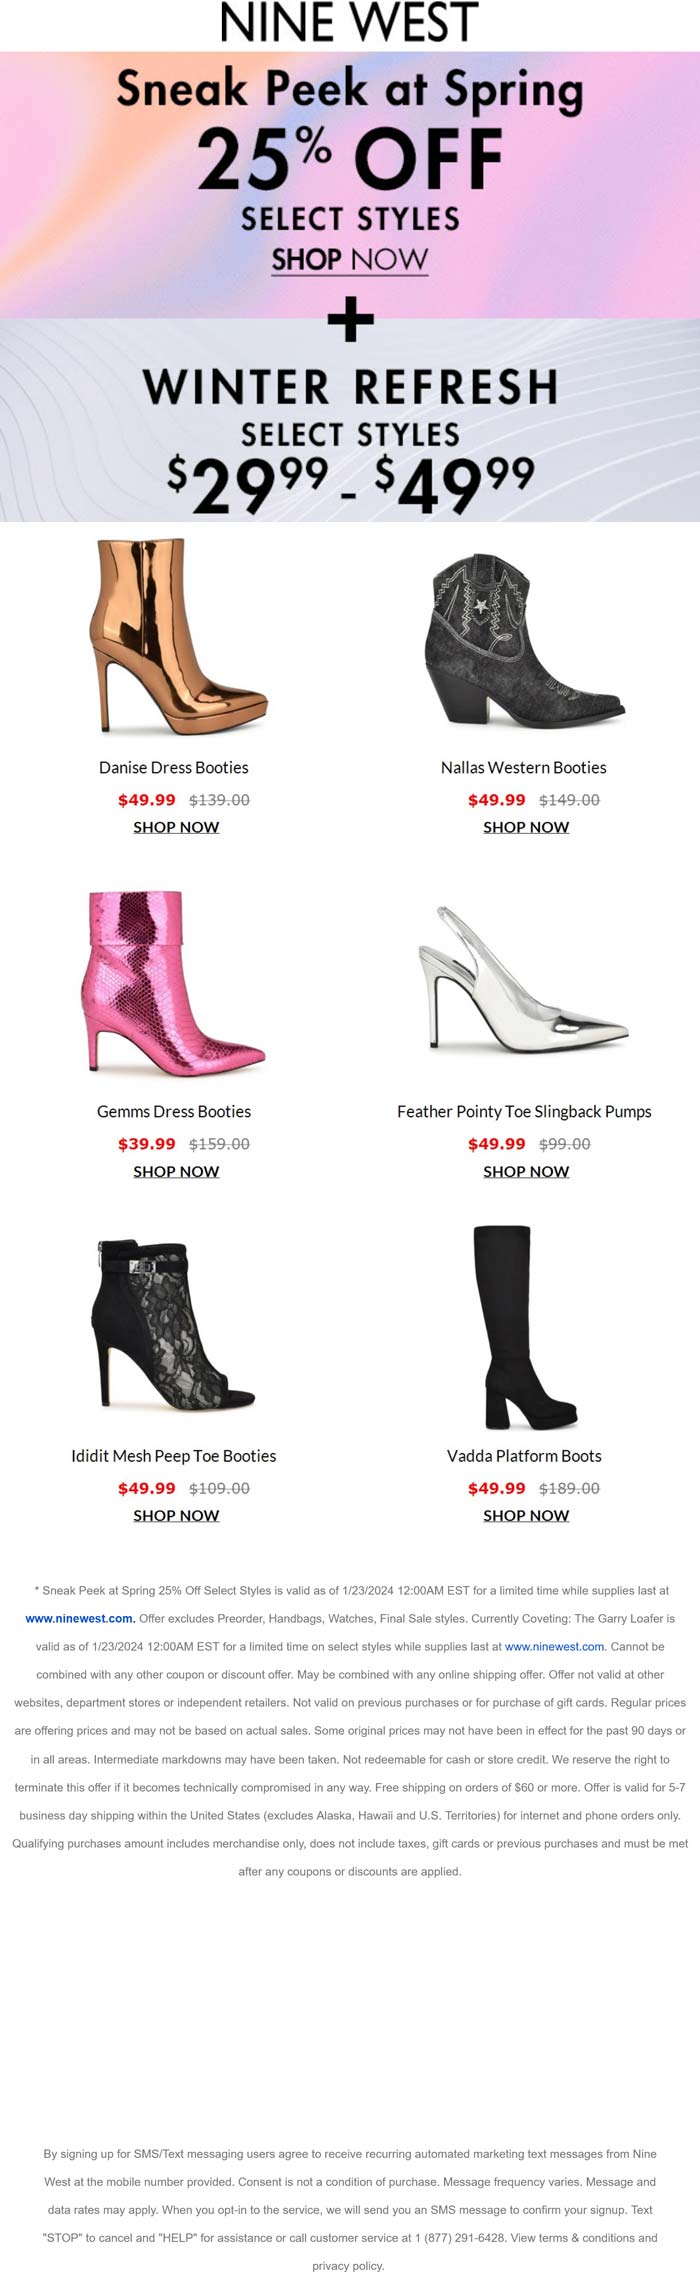 Nine West stores Coupon  25% off spring styles at Nine West #ninewest 